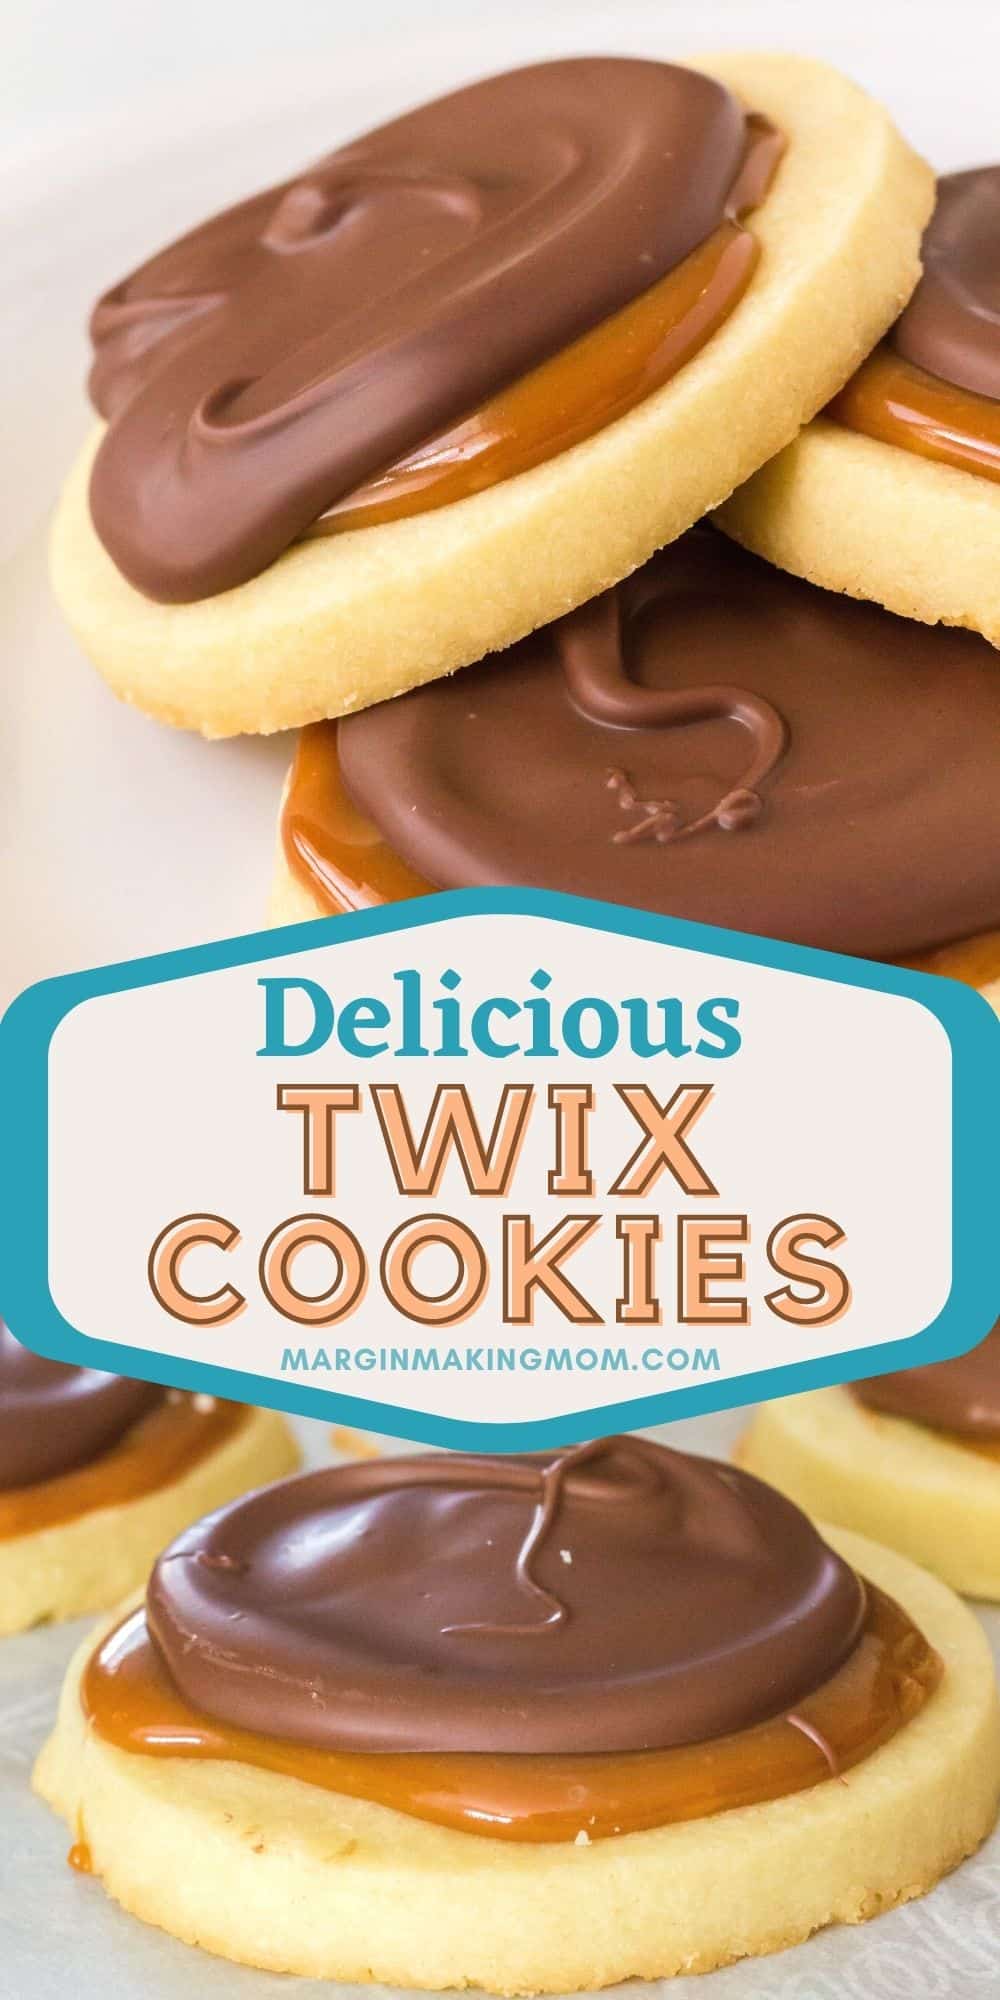 collage image featuring two photos of Twix cookies. One is a close-up of the cookies on parchment paper, the other is a stack of three cookies on a white plate